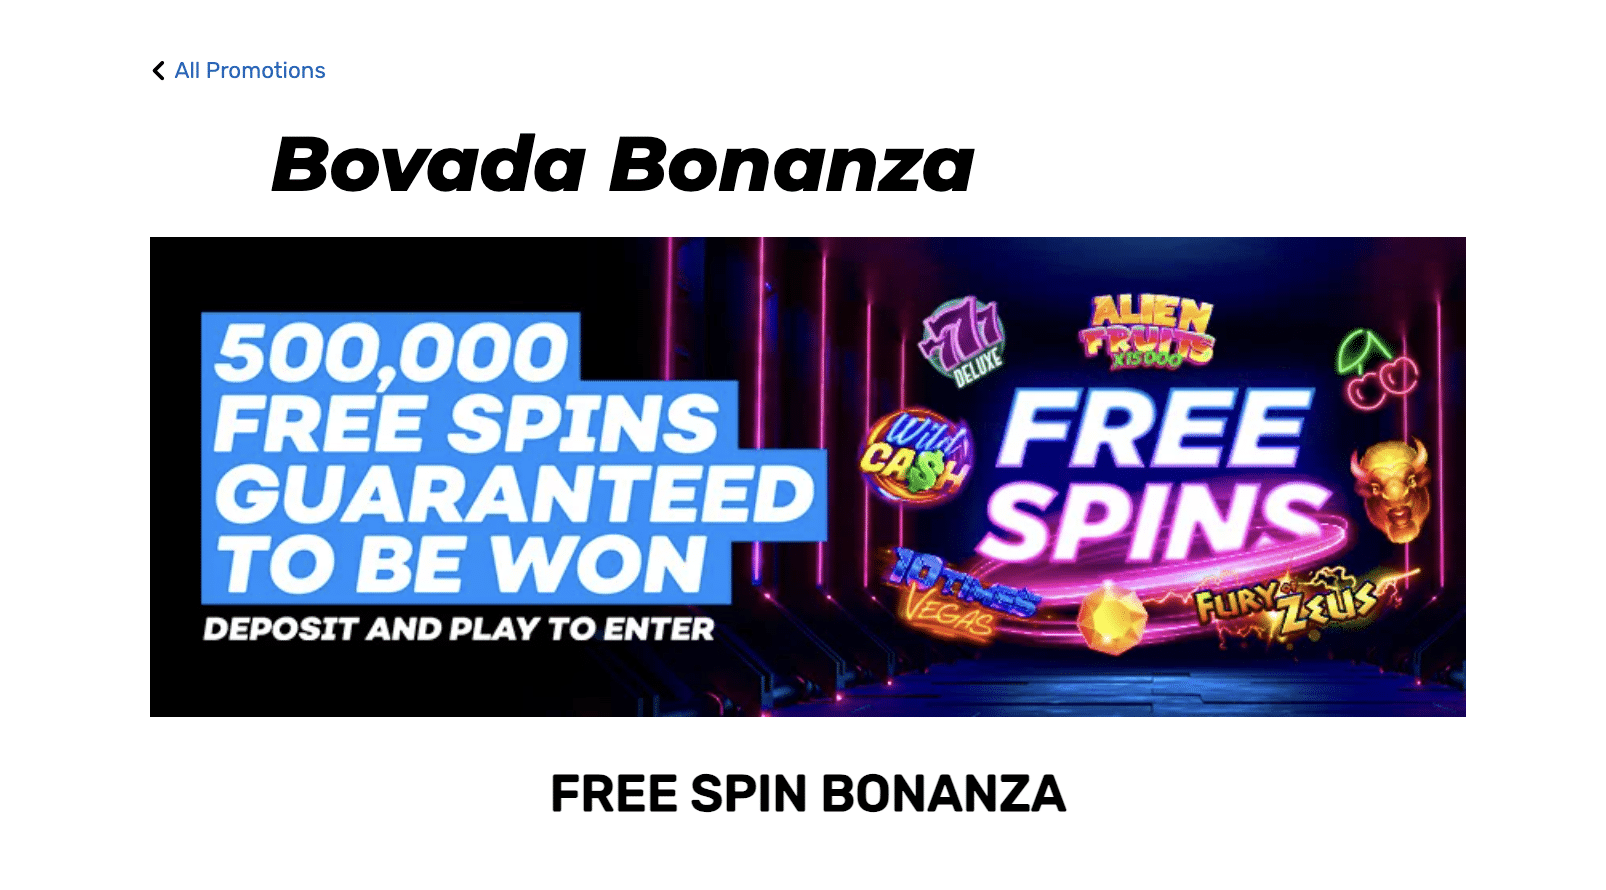 Bovada Casino promotions 